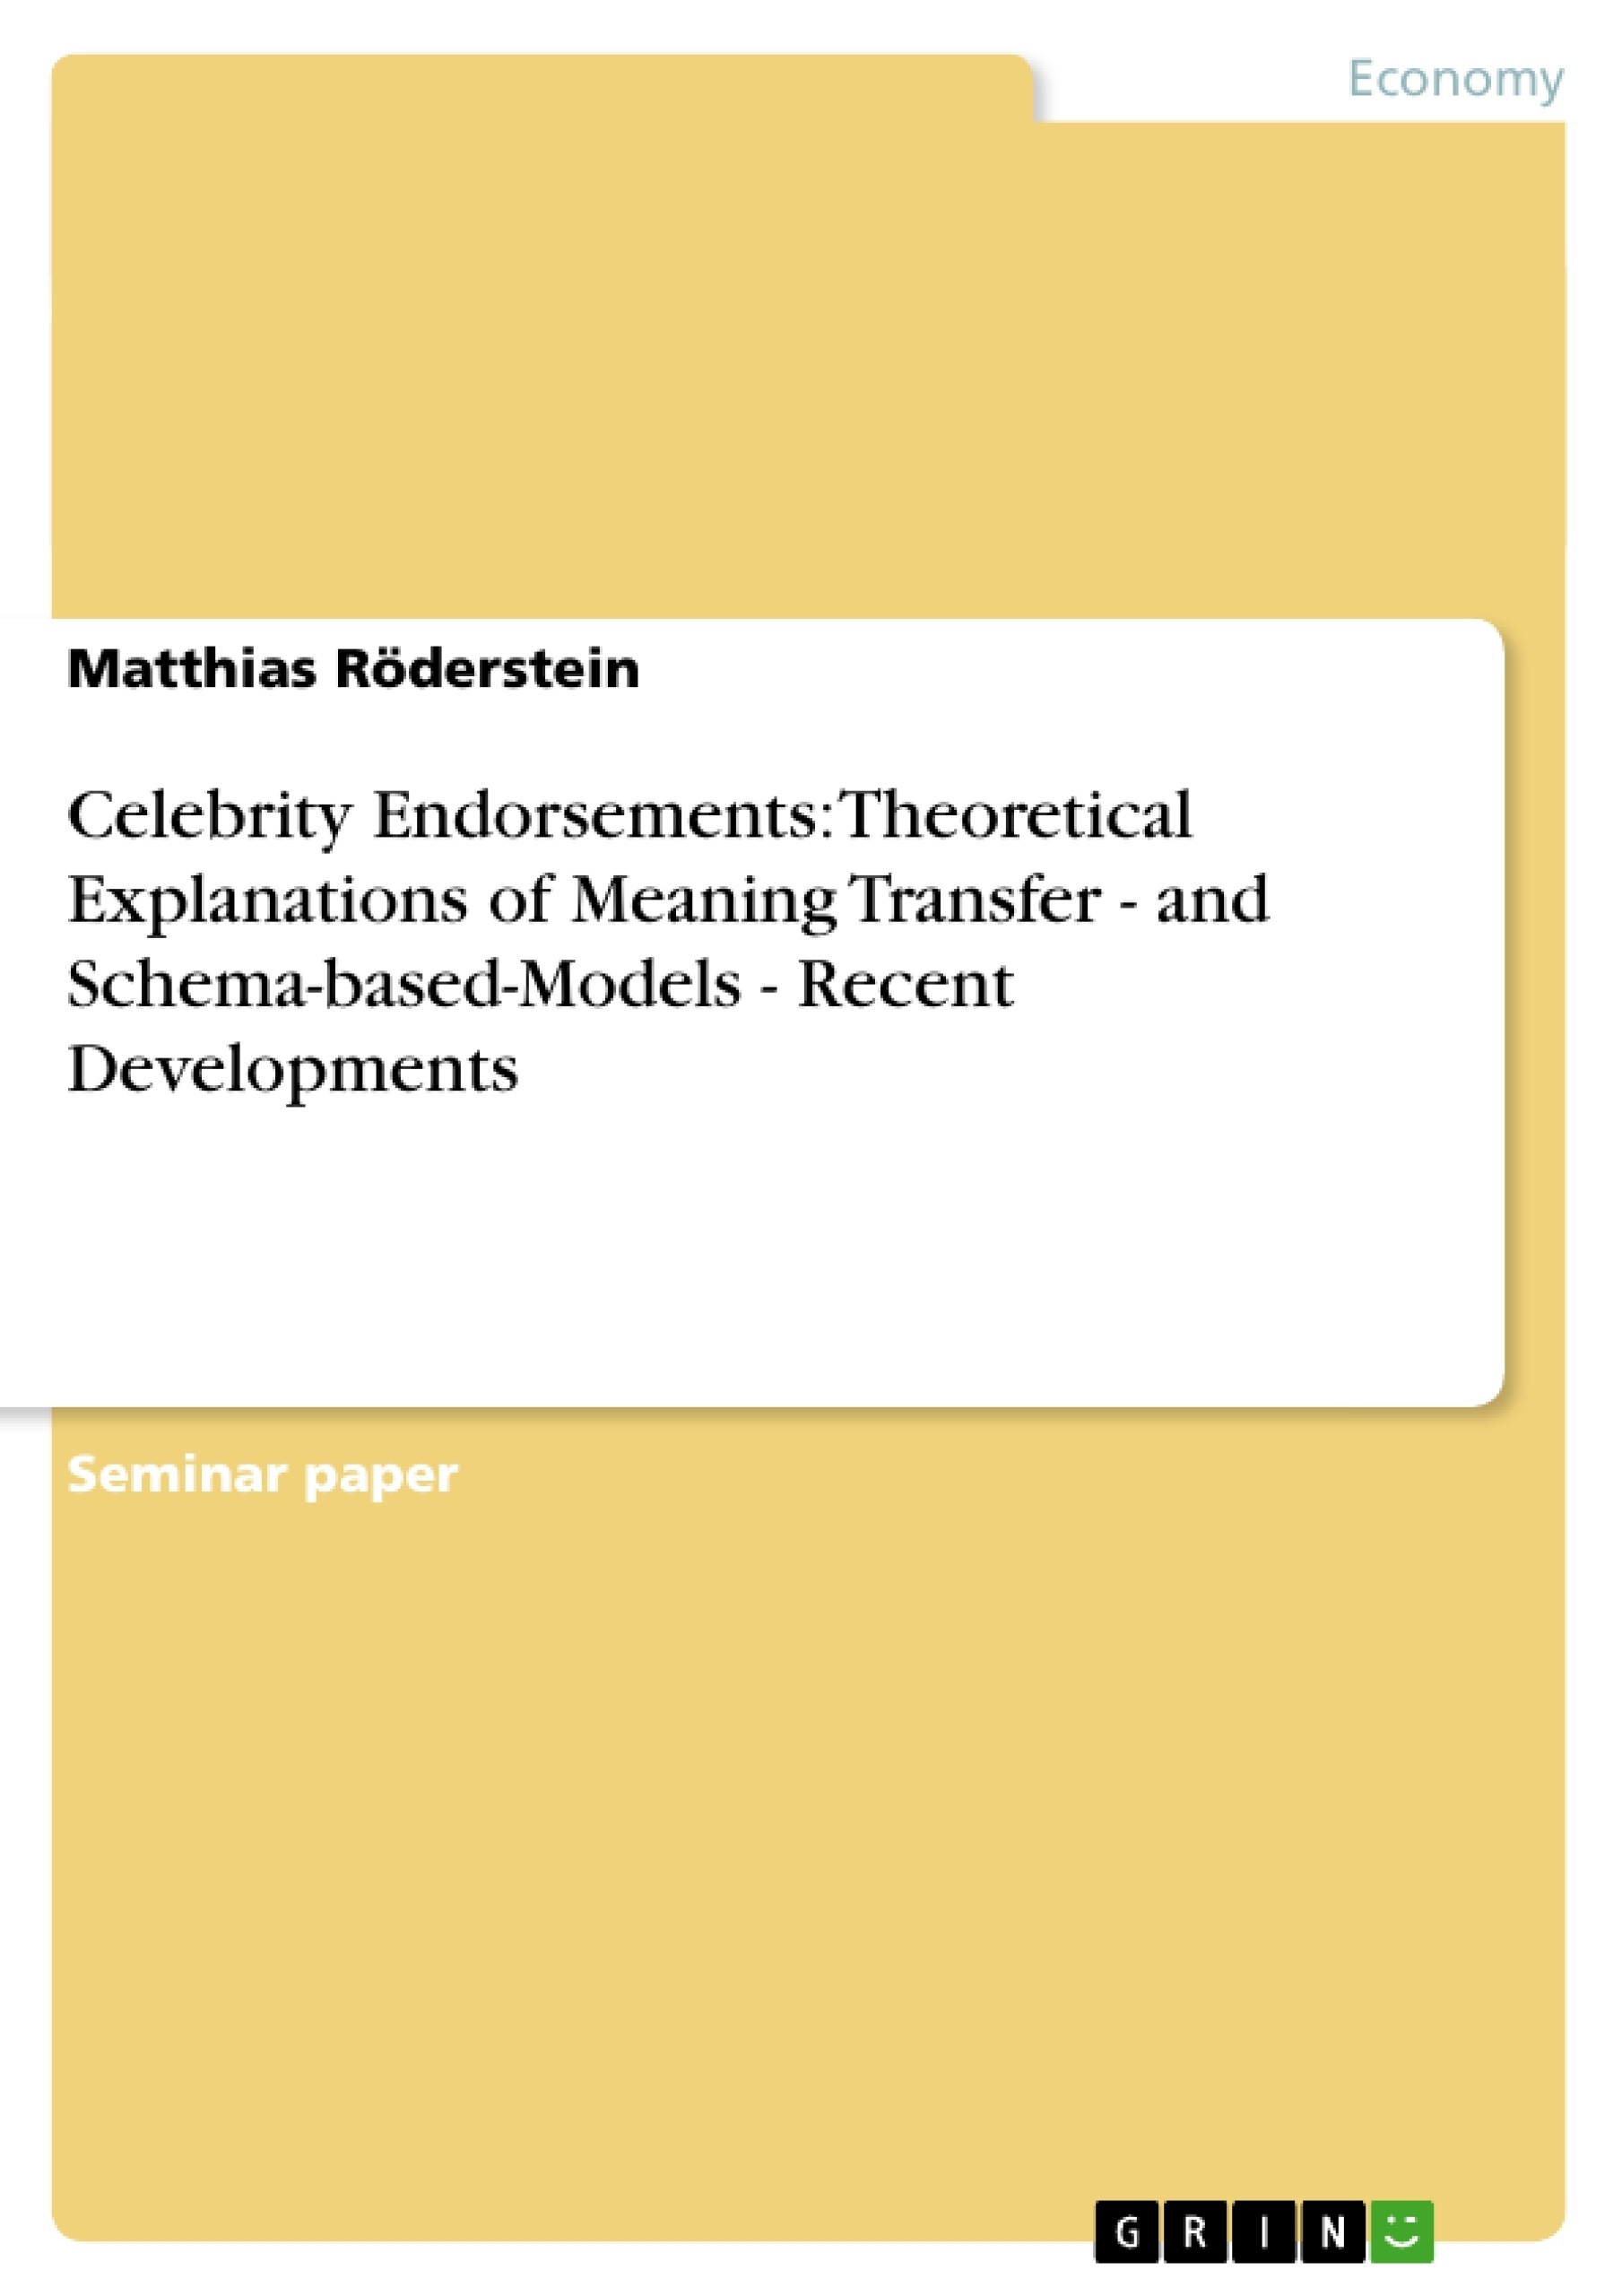 Title: Celebrity Endorsements: Theoretical Explanations of Meaning Transfer - and Schema-based-Models - Recent Developments